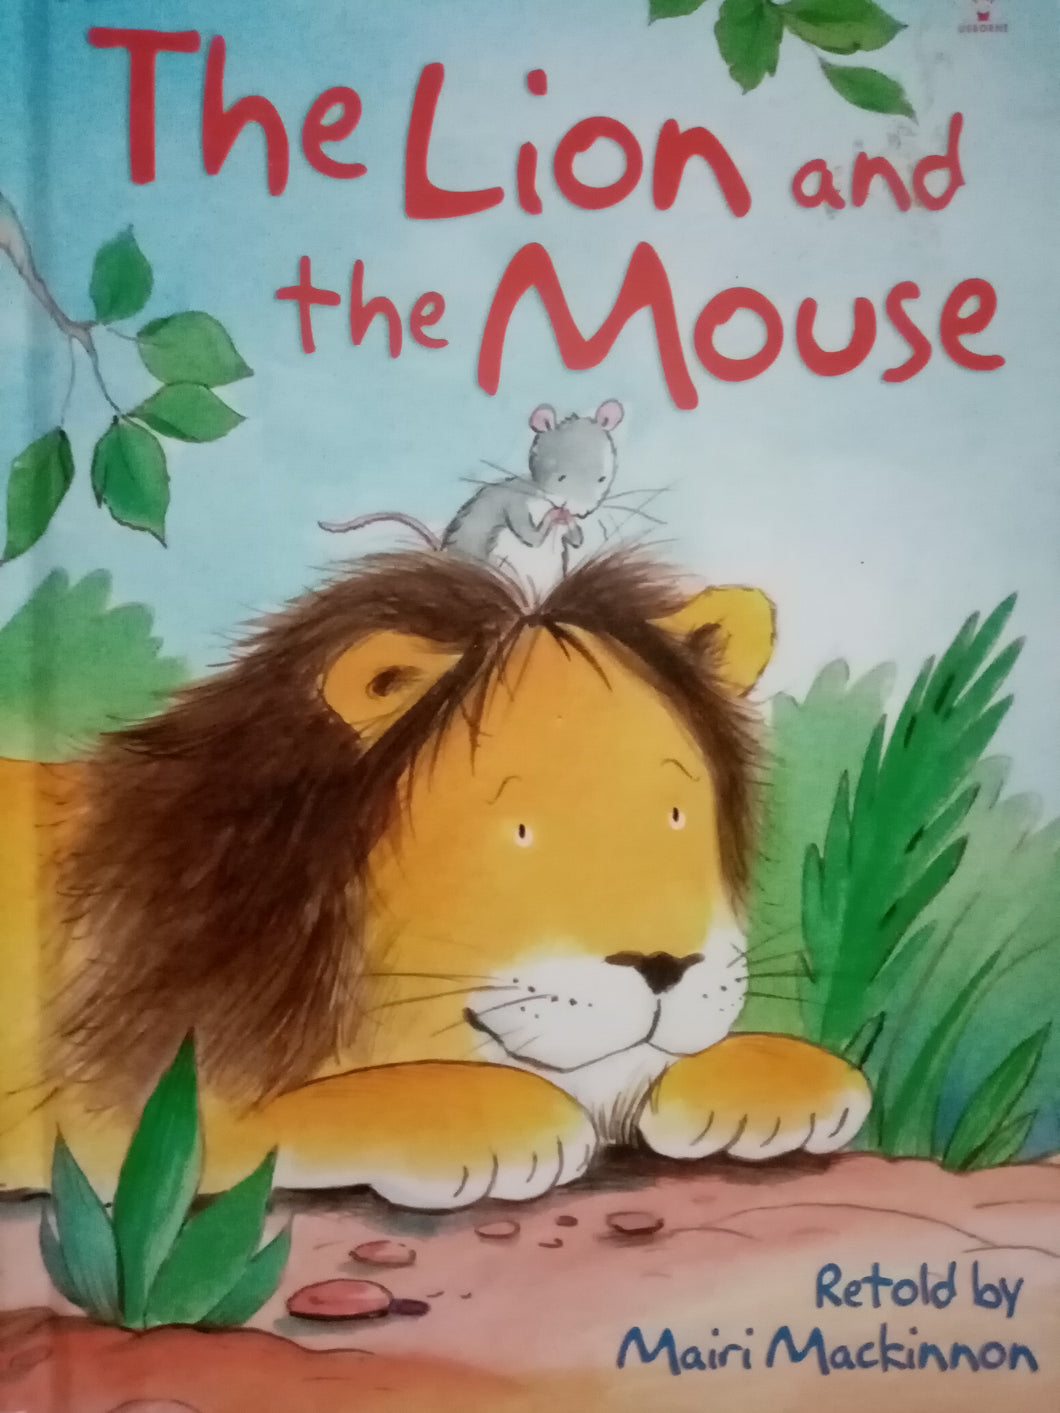 The Lion and tge Mouse by Mairi Mackinnon